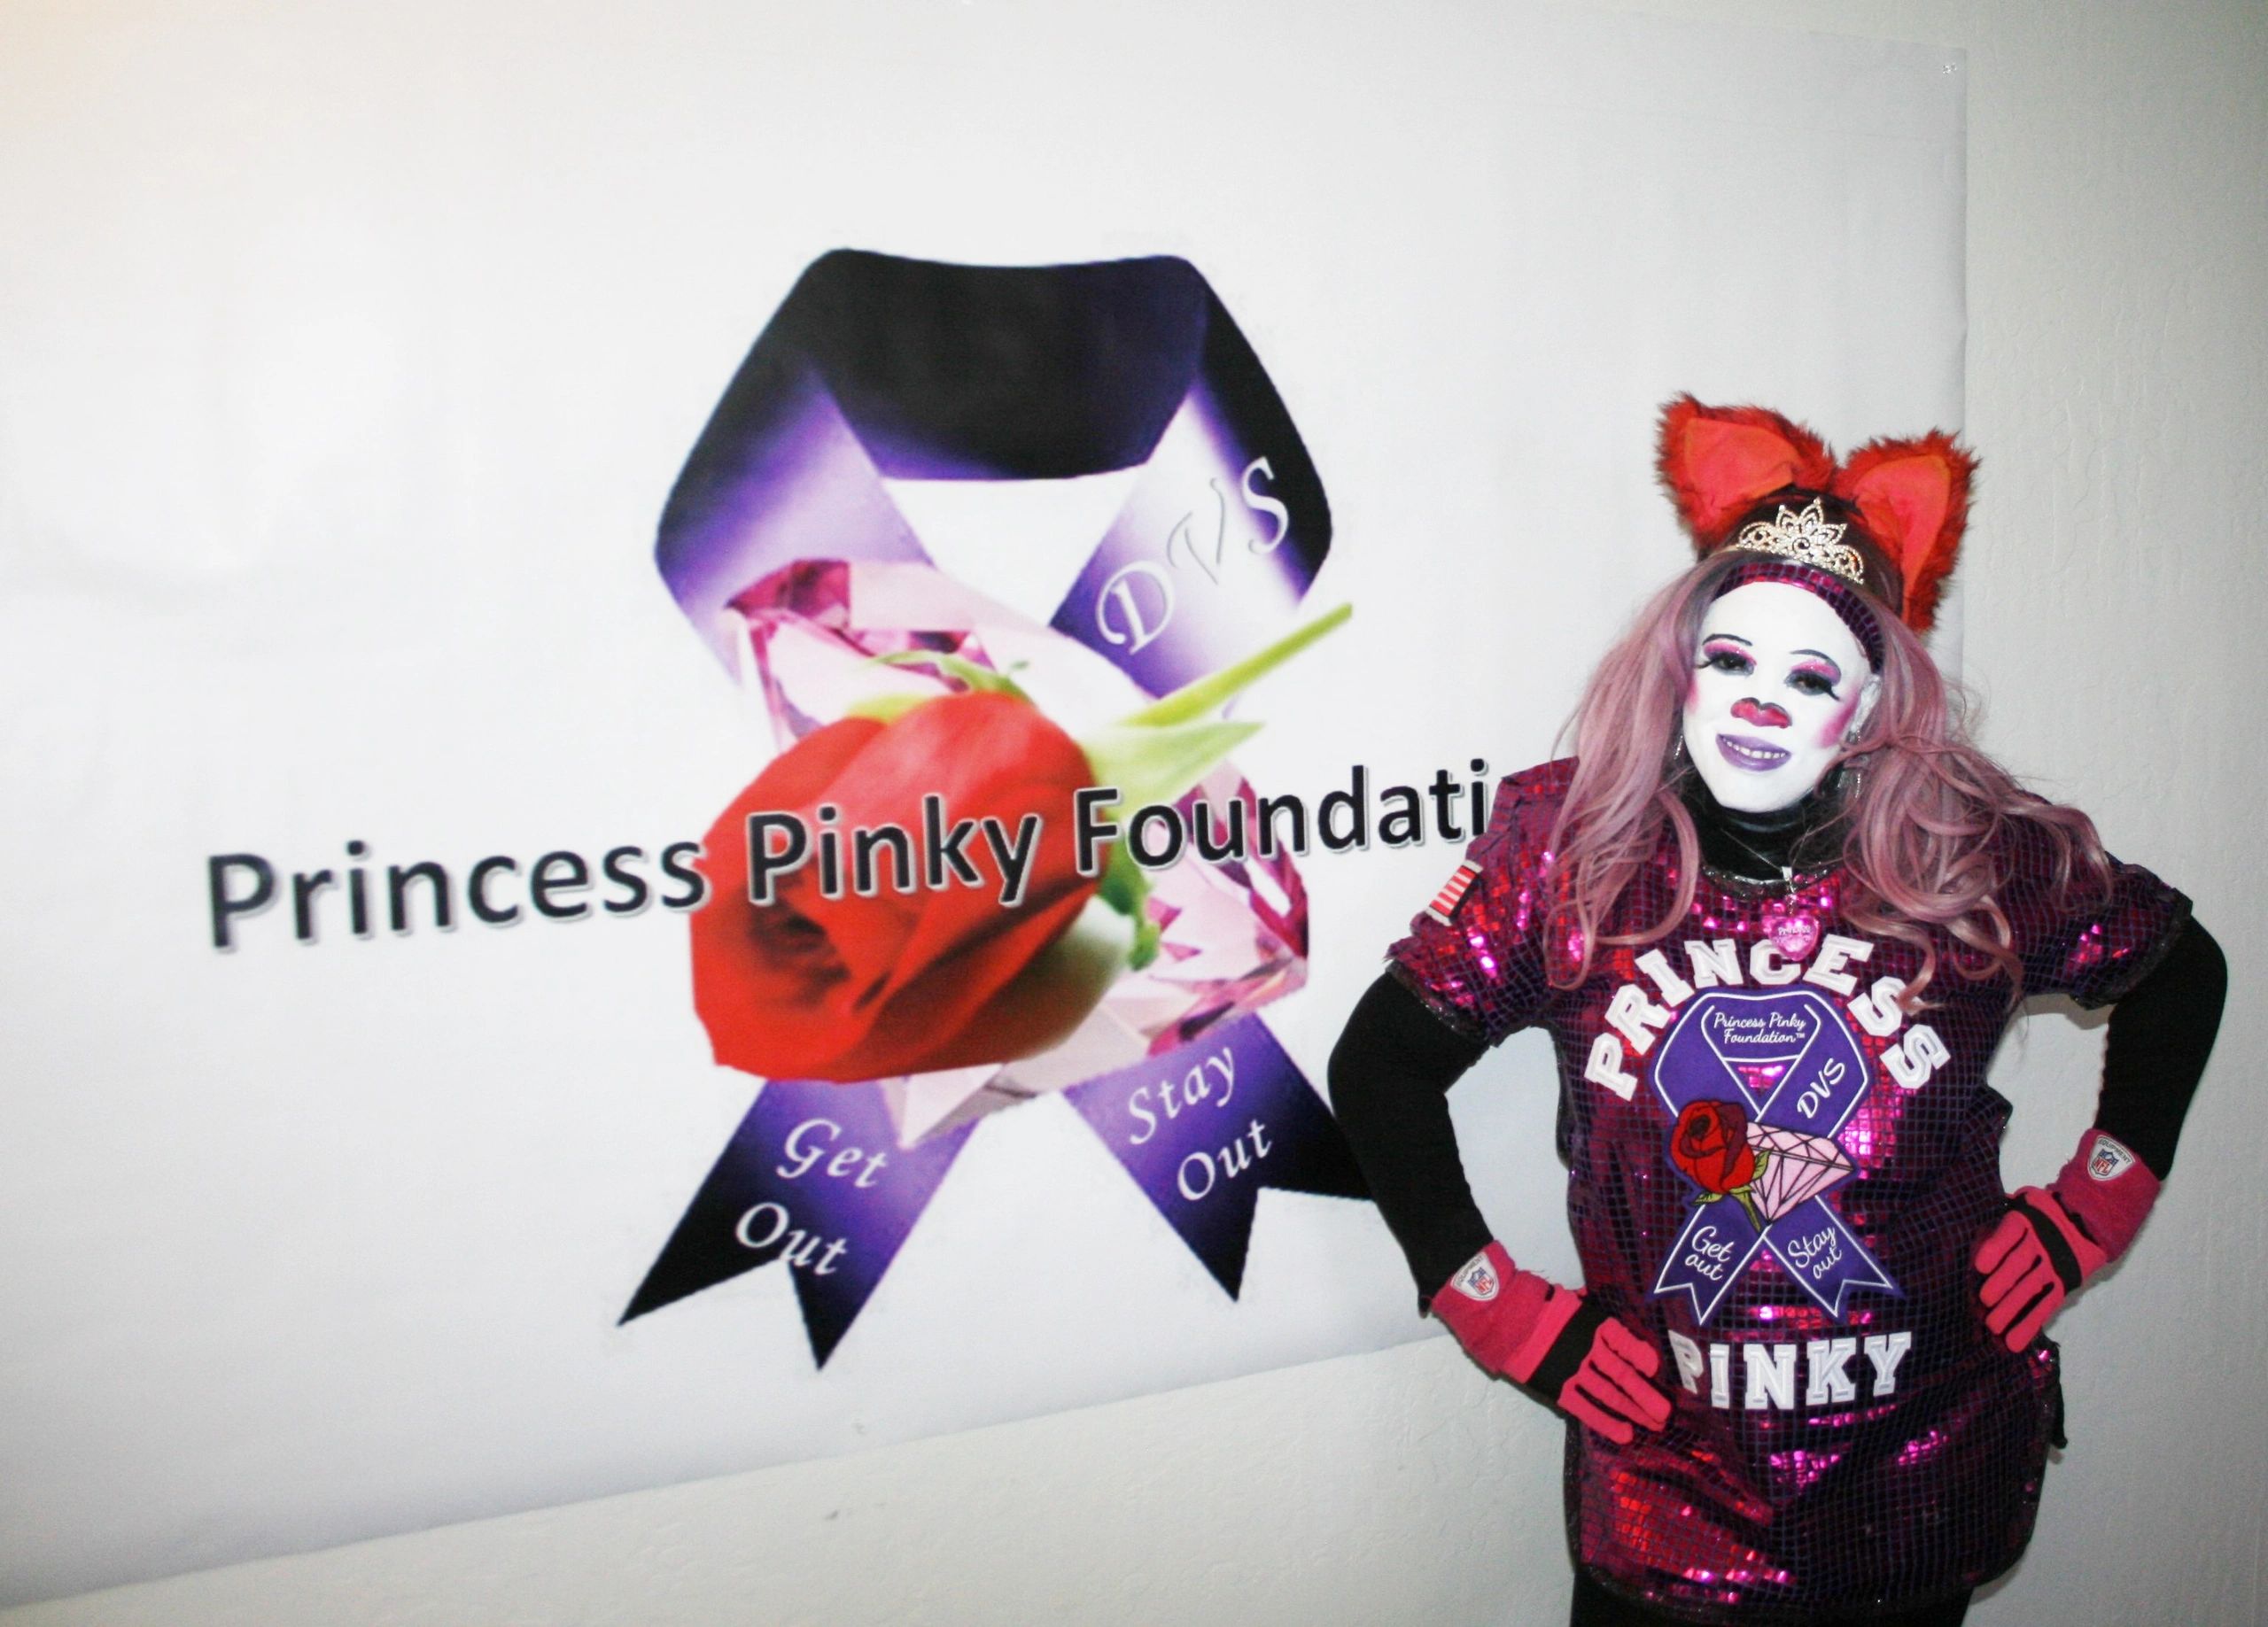 Welcome to the Princess Pinky Foundation!  We provide services for Domestic Violence Surviors.